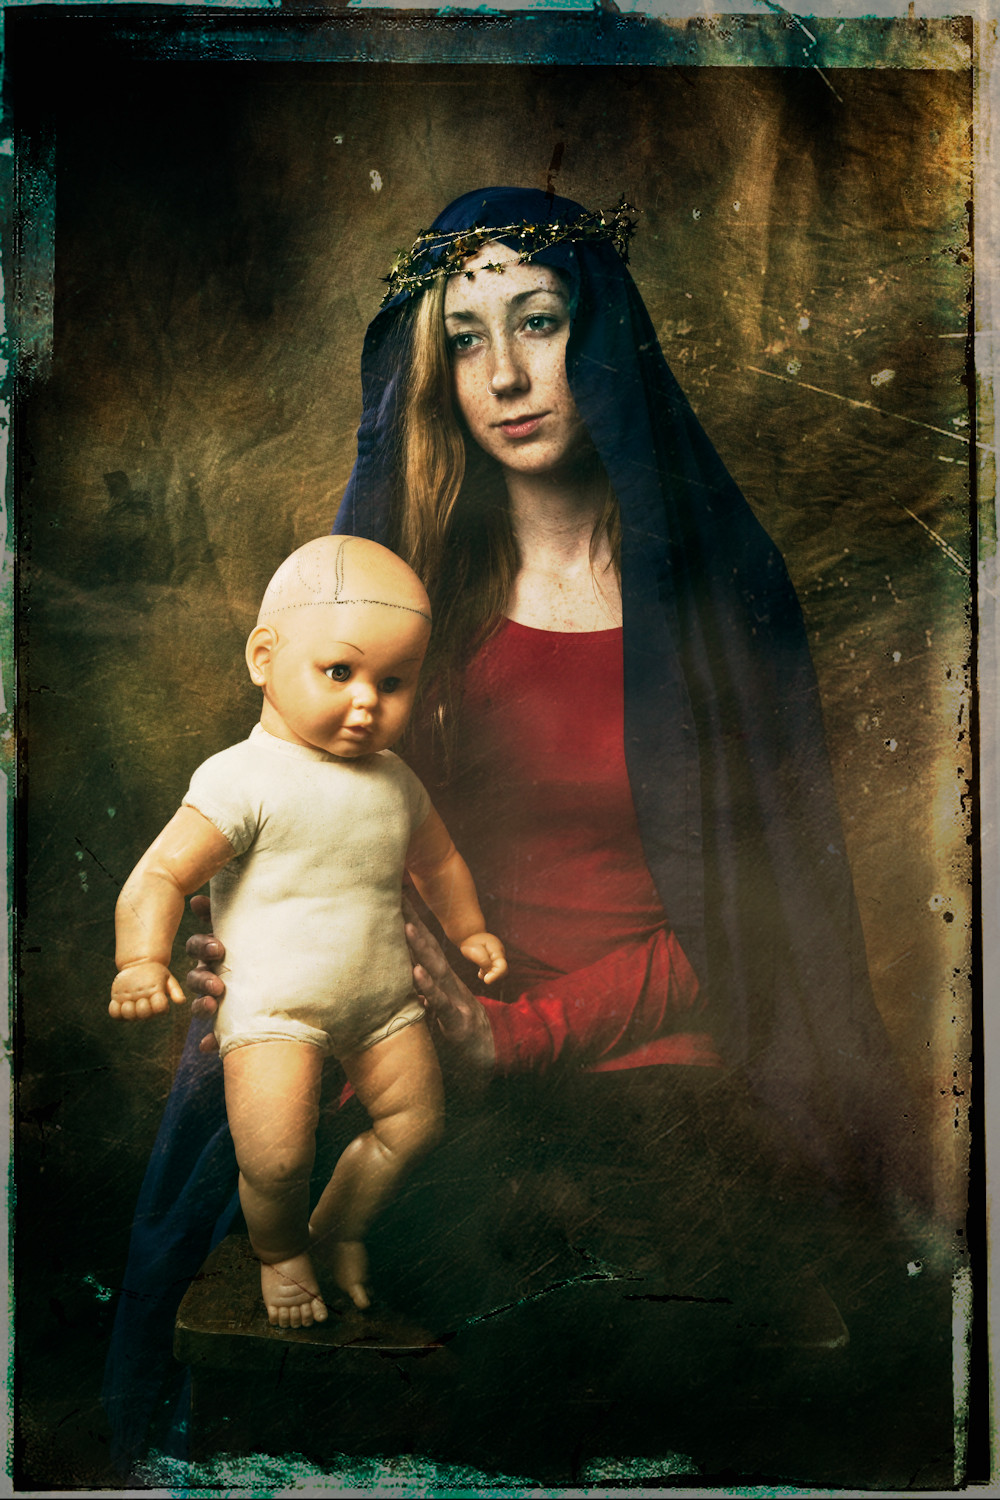 "Madonna and Child" &nbsp; - Merit Award winner and Viewpoint Photographic Art Center Award winner for Color Photography.